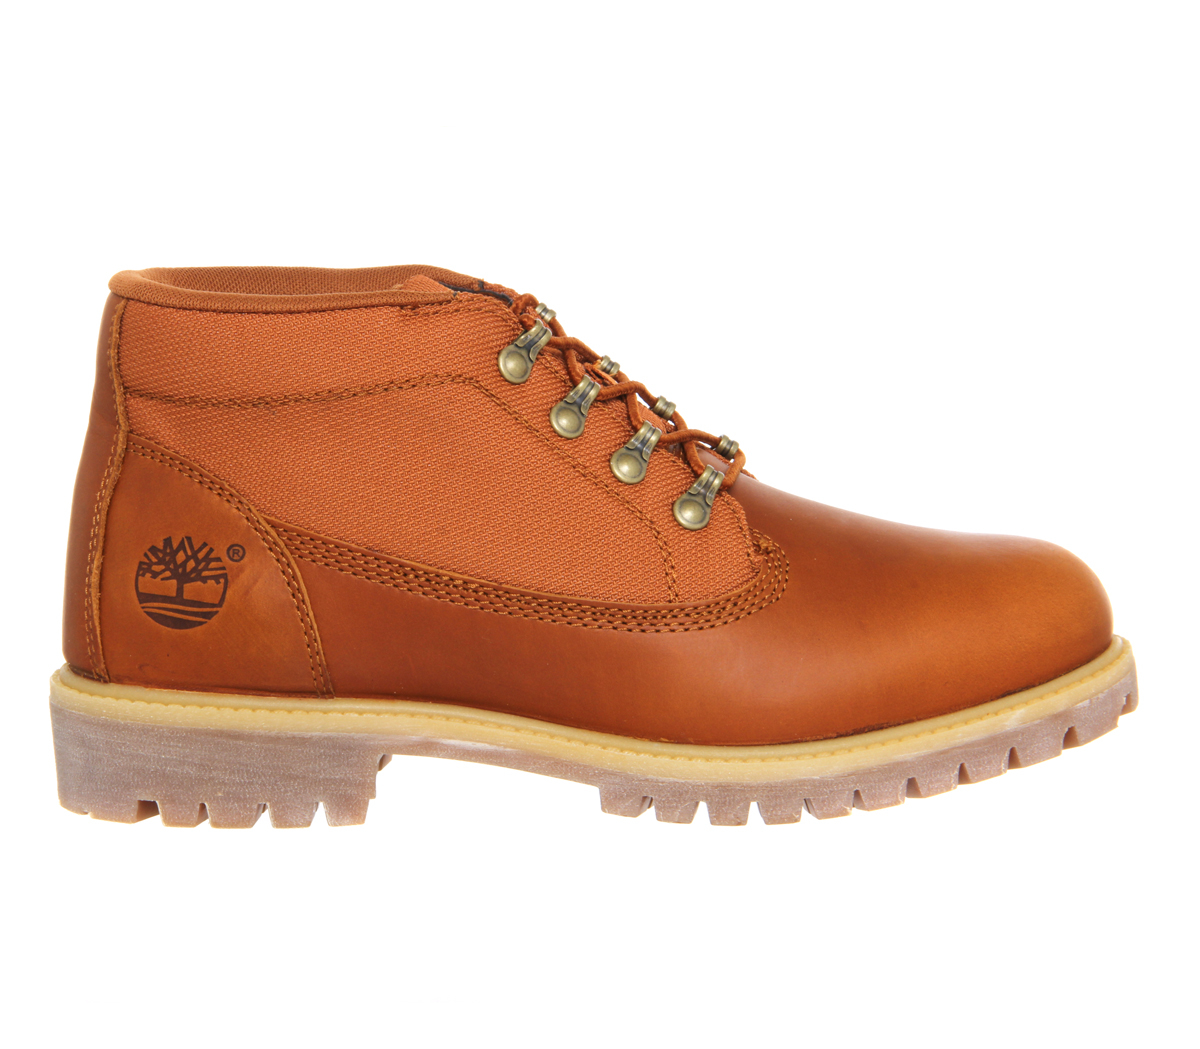 Timberland Campsite Chukka Boots Exclusive in Brown for Men - Lyst